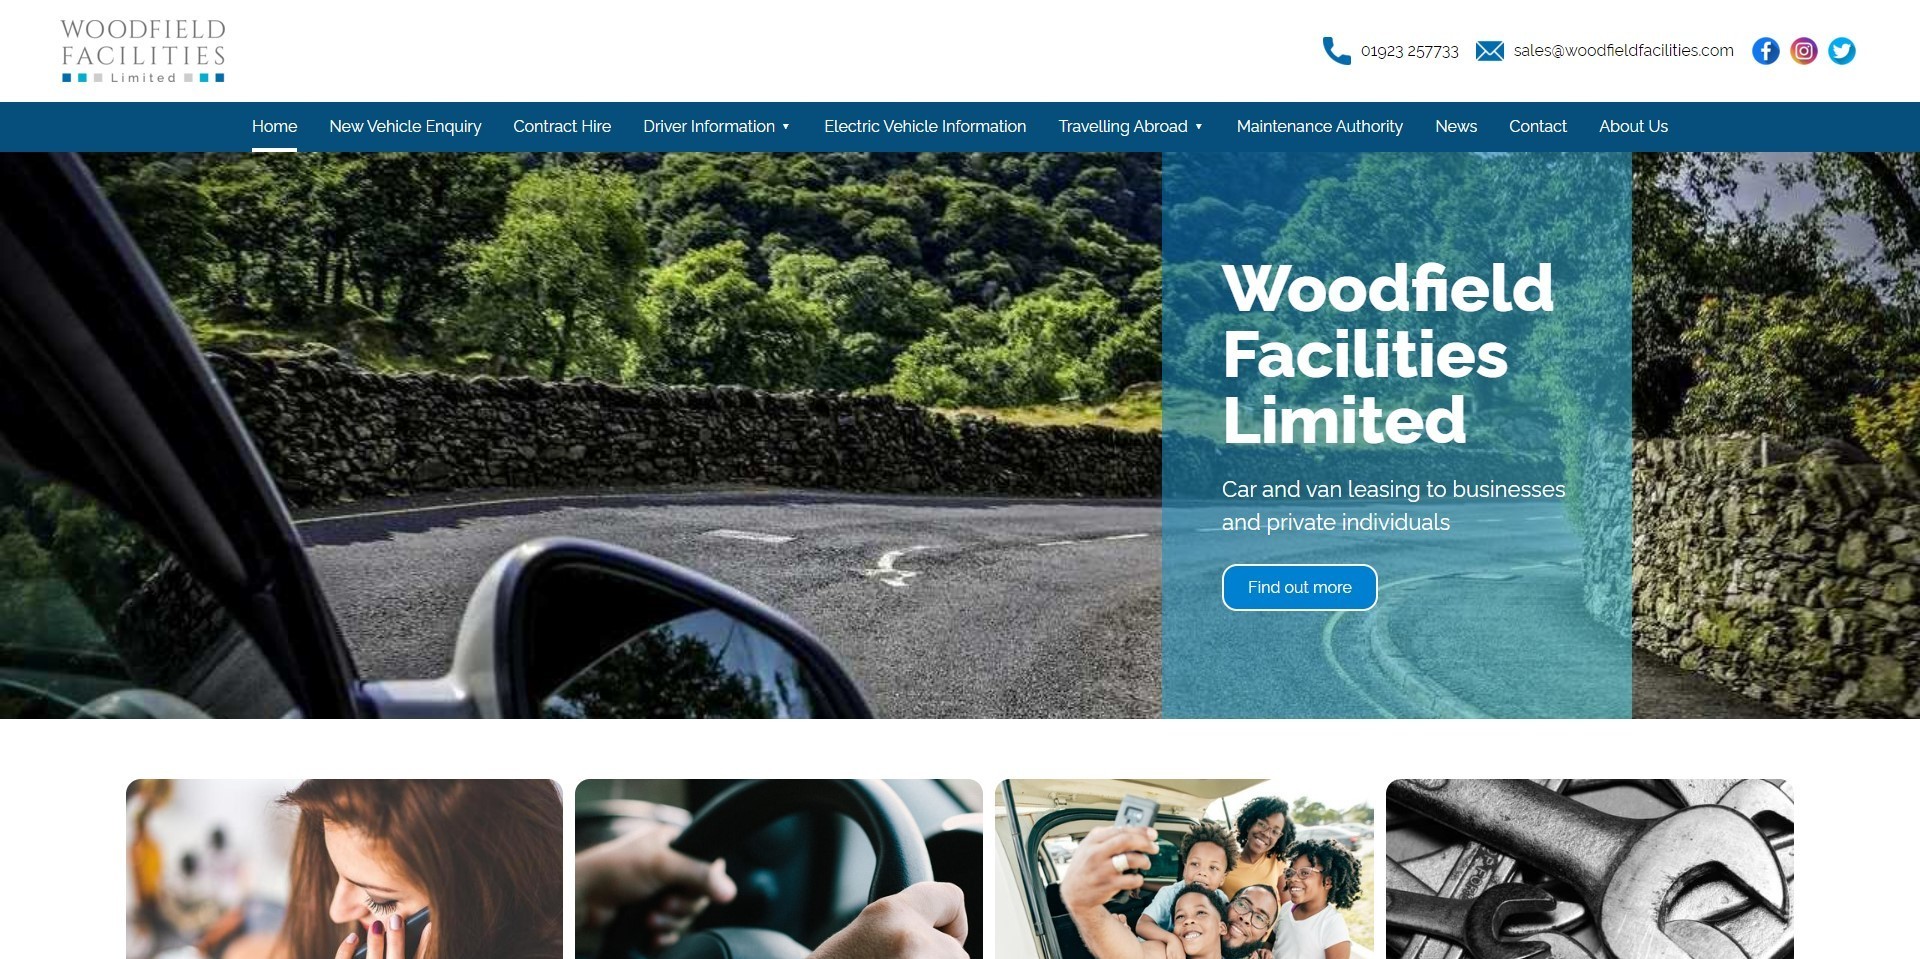 The new Woodfield Facilities website designed by it'seeze, displayed on desktop